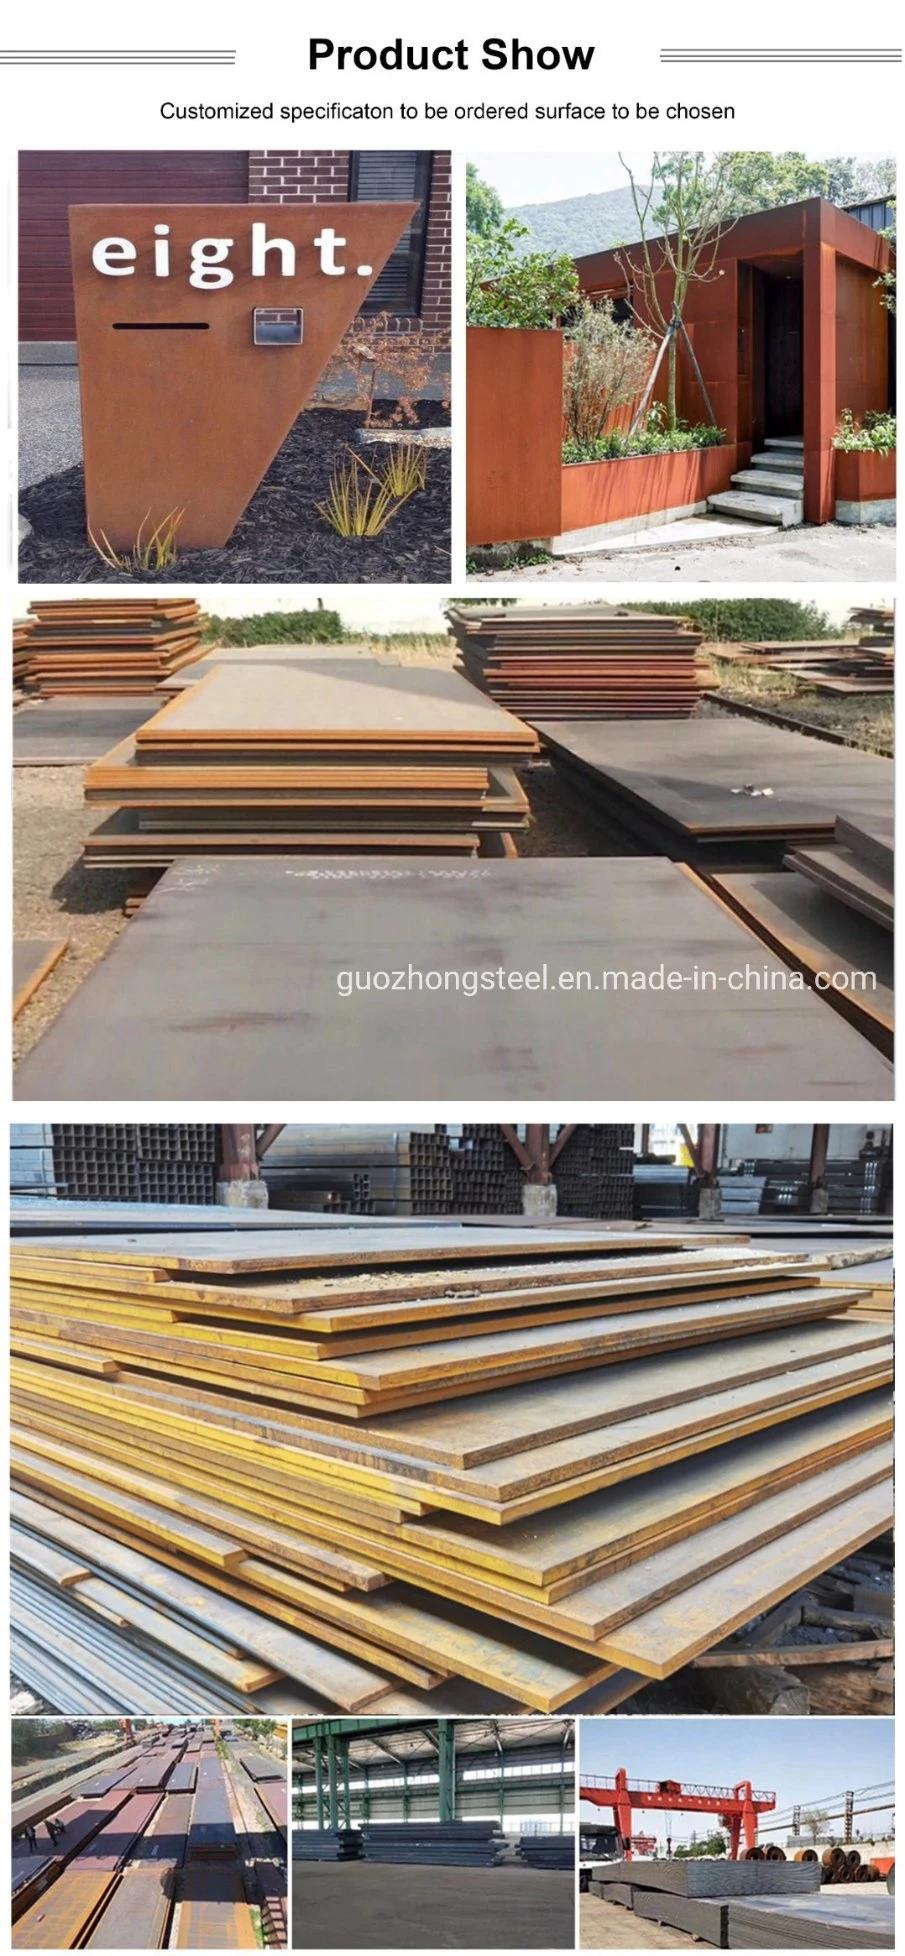 Top Selling Guozhong Q345b ASTM A529m A572m A588m Hot Rolled Carbon Steel Plate